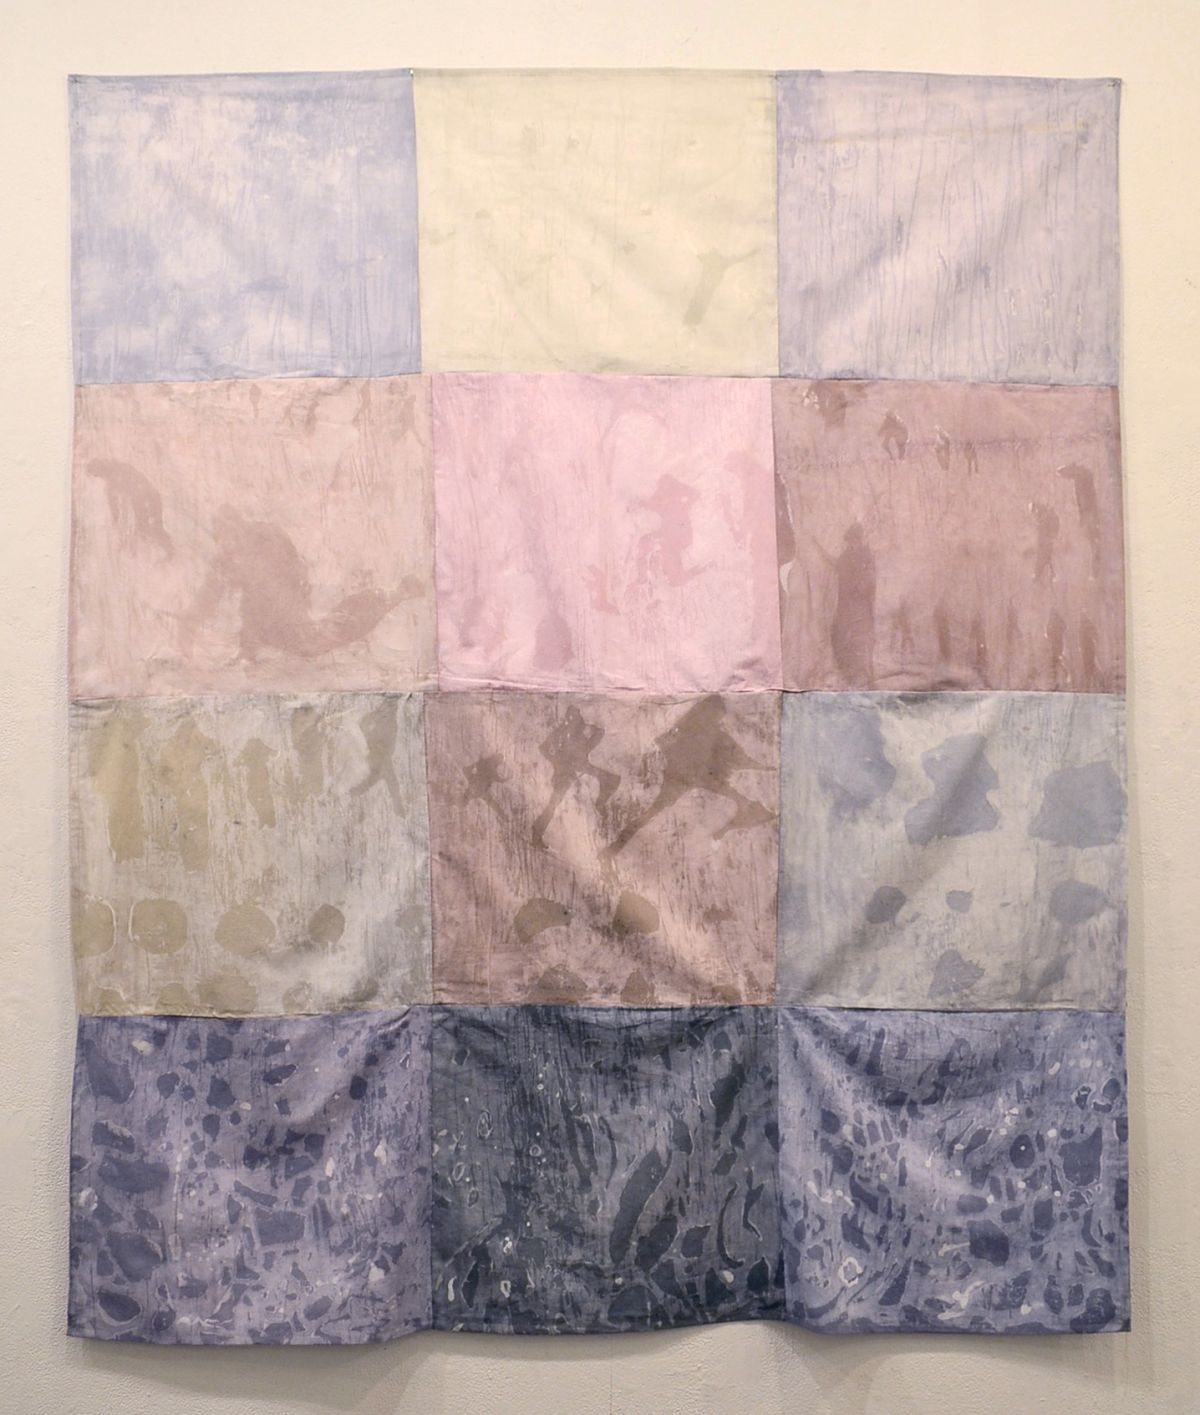 Anna Henry, Downpour, 2020, Resist-woodblock on dyed cotton, 60 x 80 ©Anna Henry